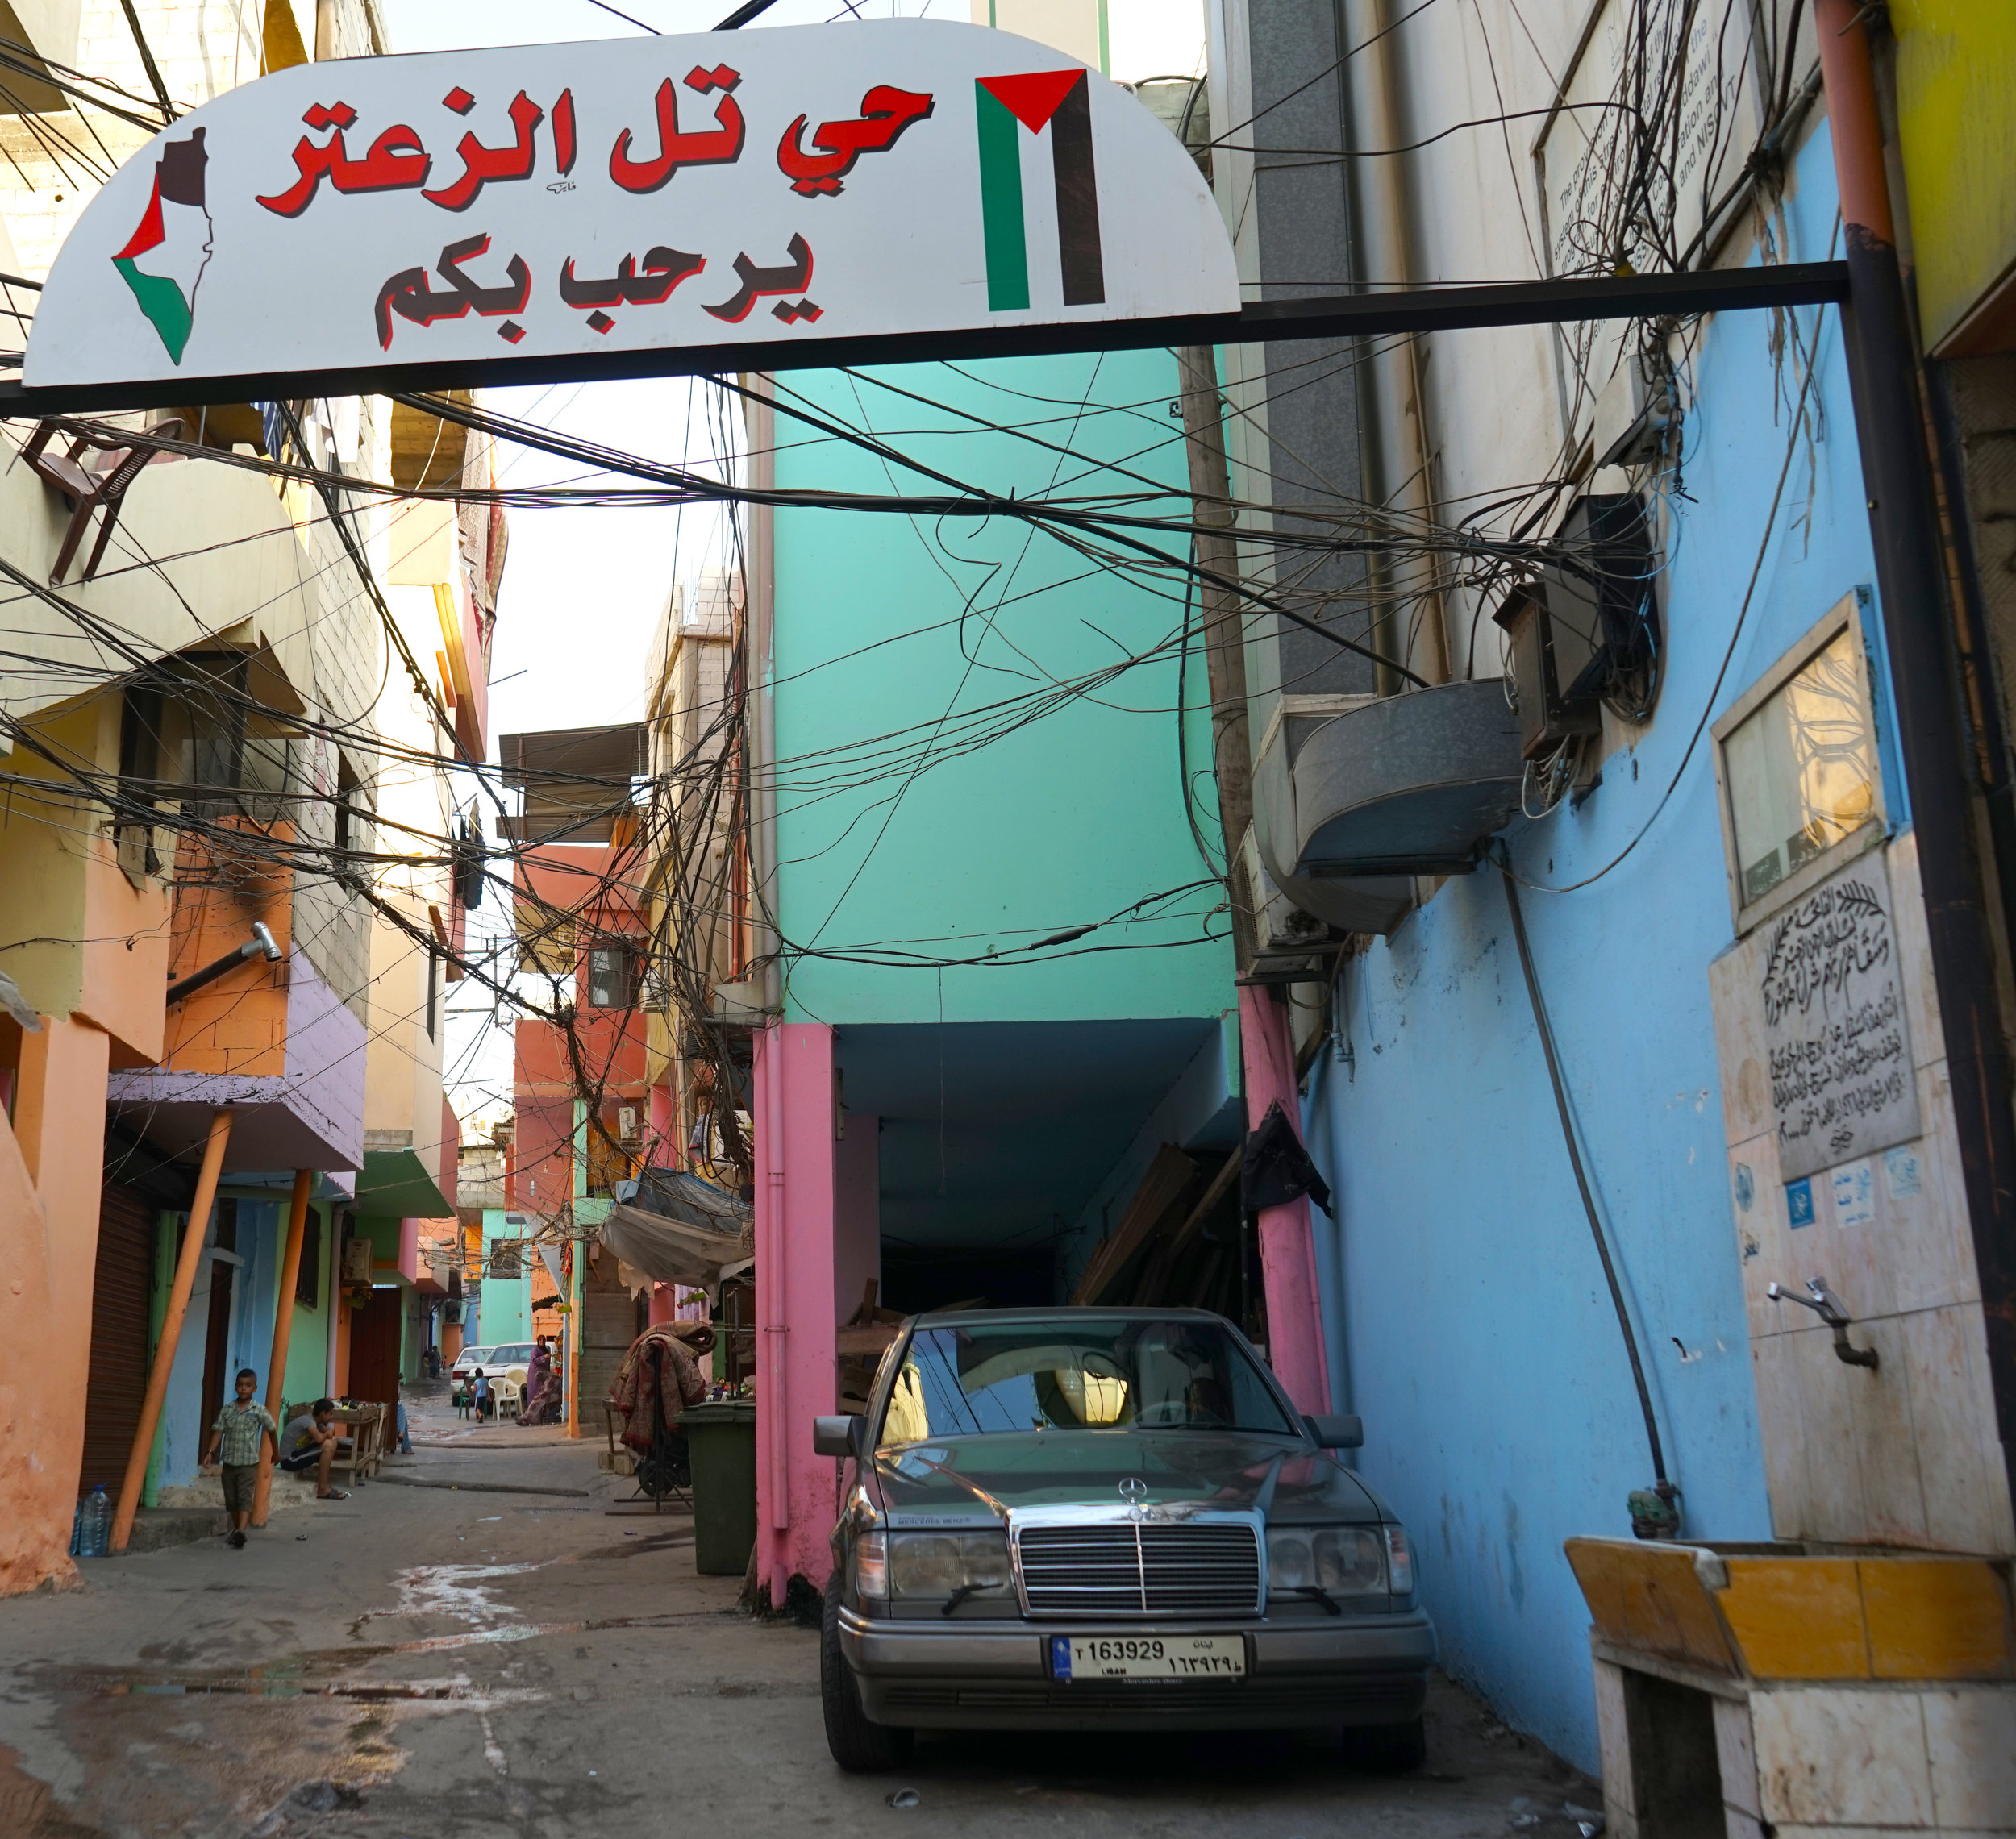  This neighborhood in the Beddawai Camp was named in memory of the Tel el-Zaatar Refugee Camp, which was massacred in 1976. 